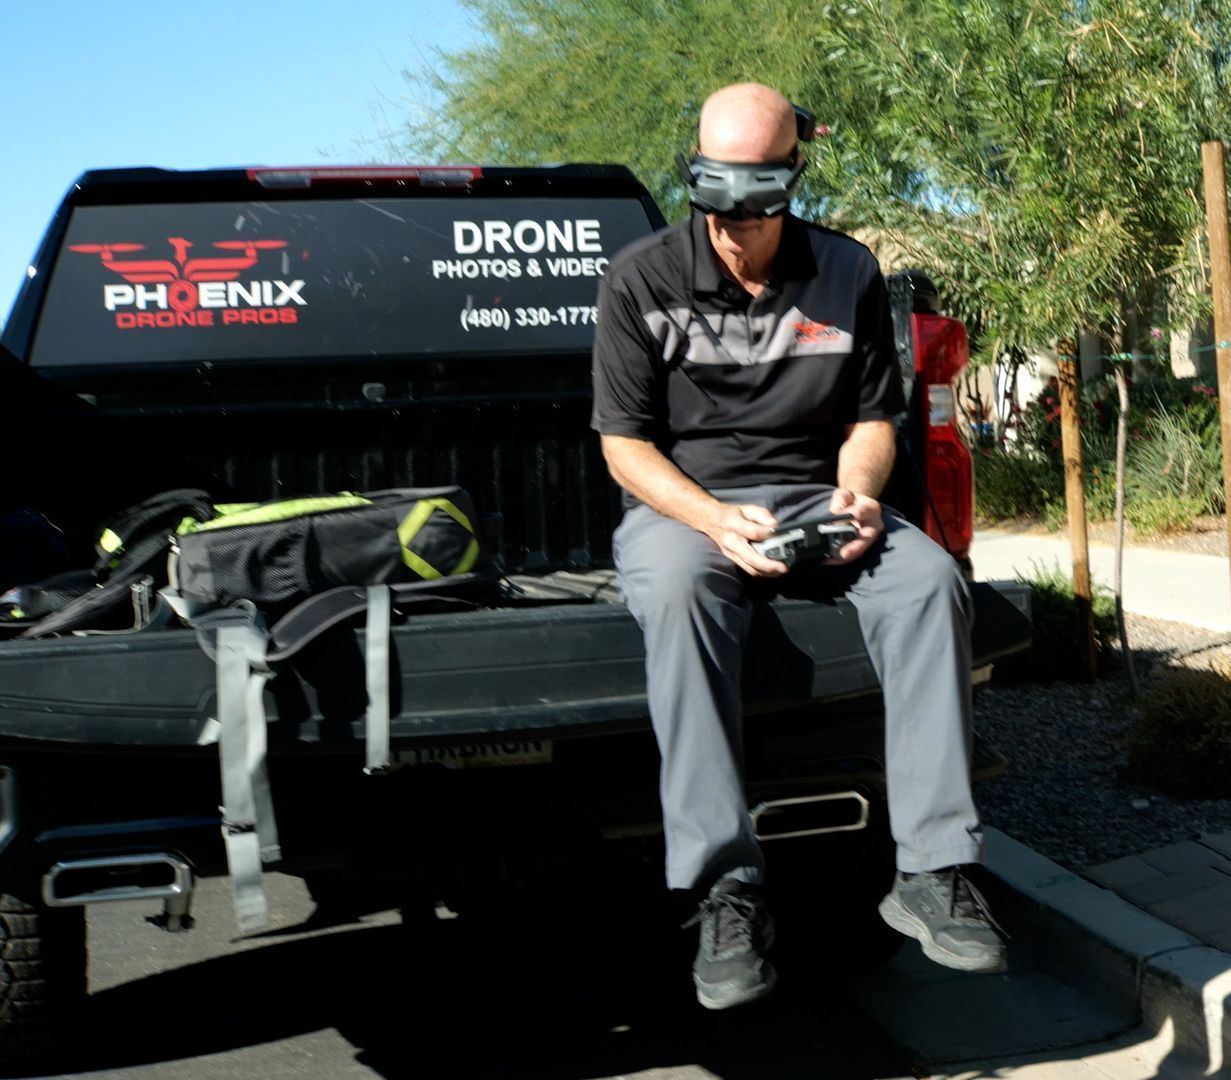 A man is sitting in the back of a phoenix drone pros truck, Photo by Phoenix Drone Pros, Robert Biggs